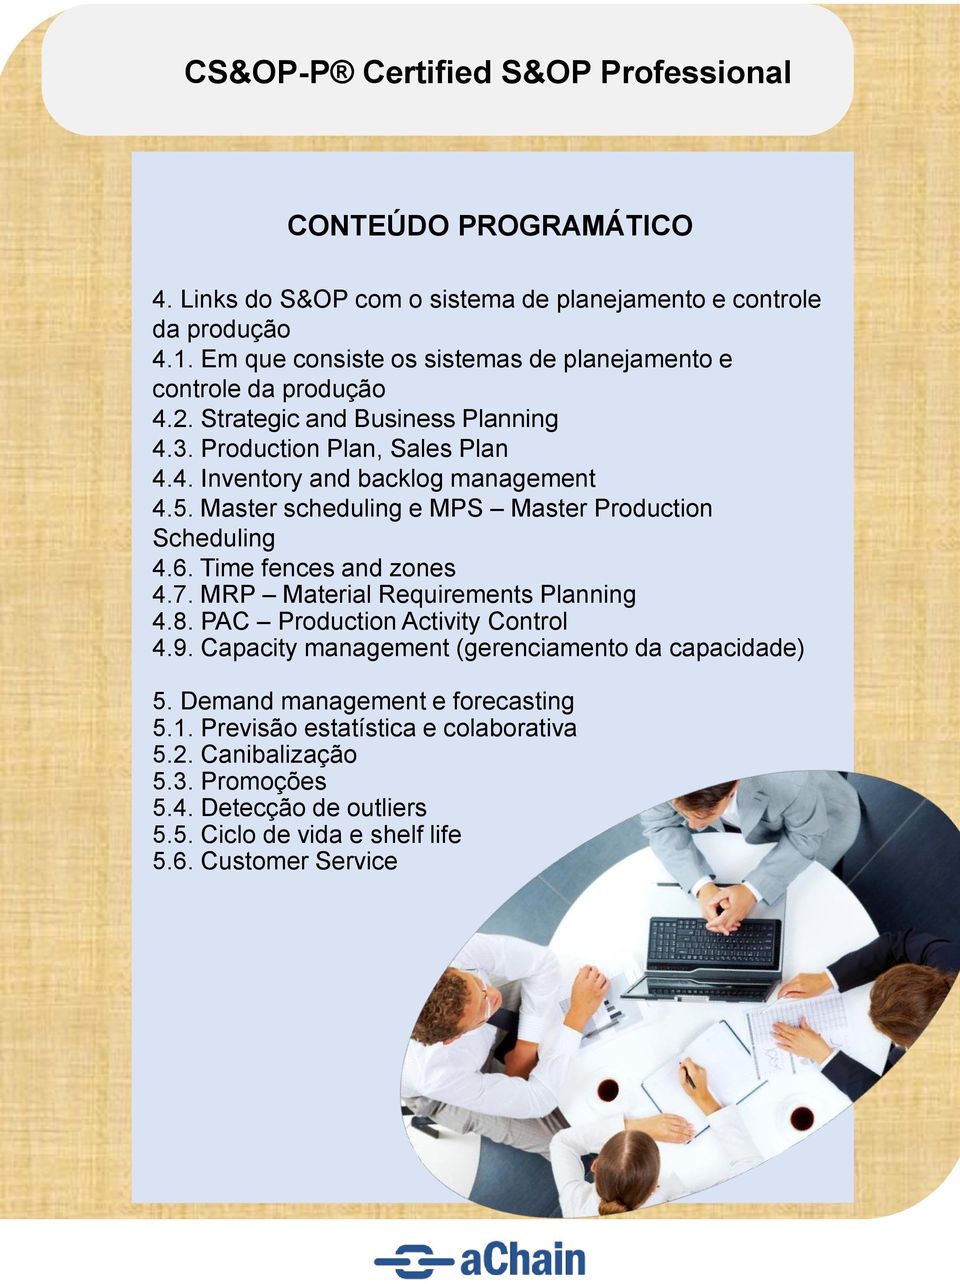 Time fences and zones 4.7. MRP Material Requirements Planning 4.8. PAC Production Activity Control 4.9. Capacity management (gerenciamento da capacidade) 5.